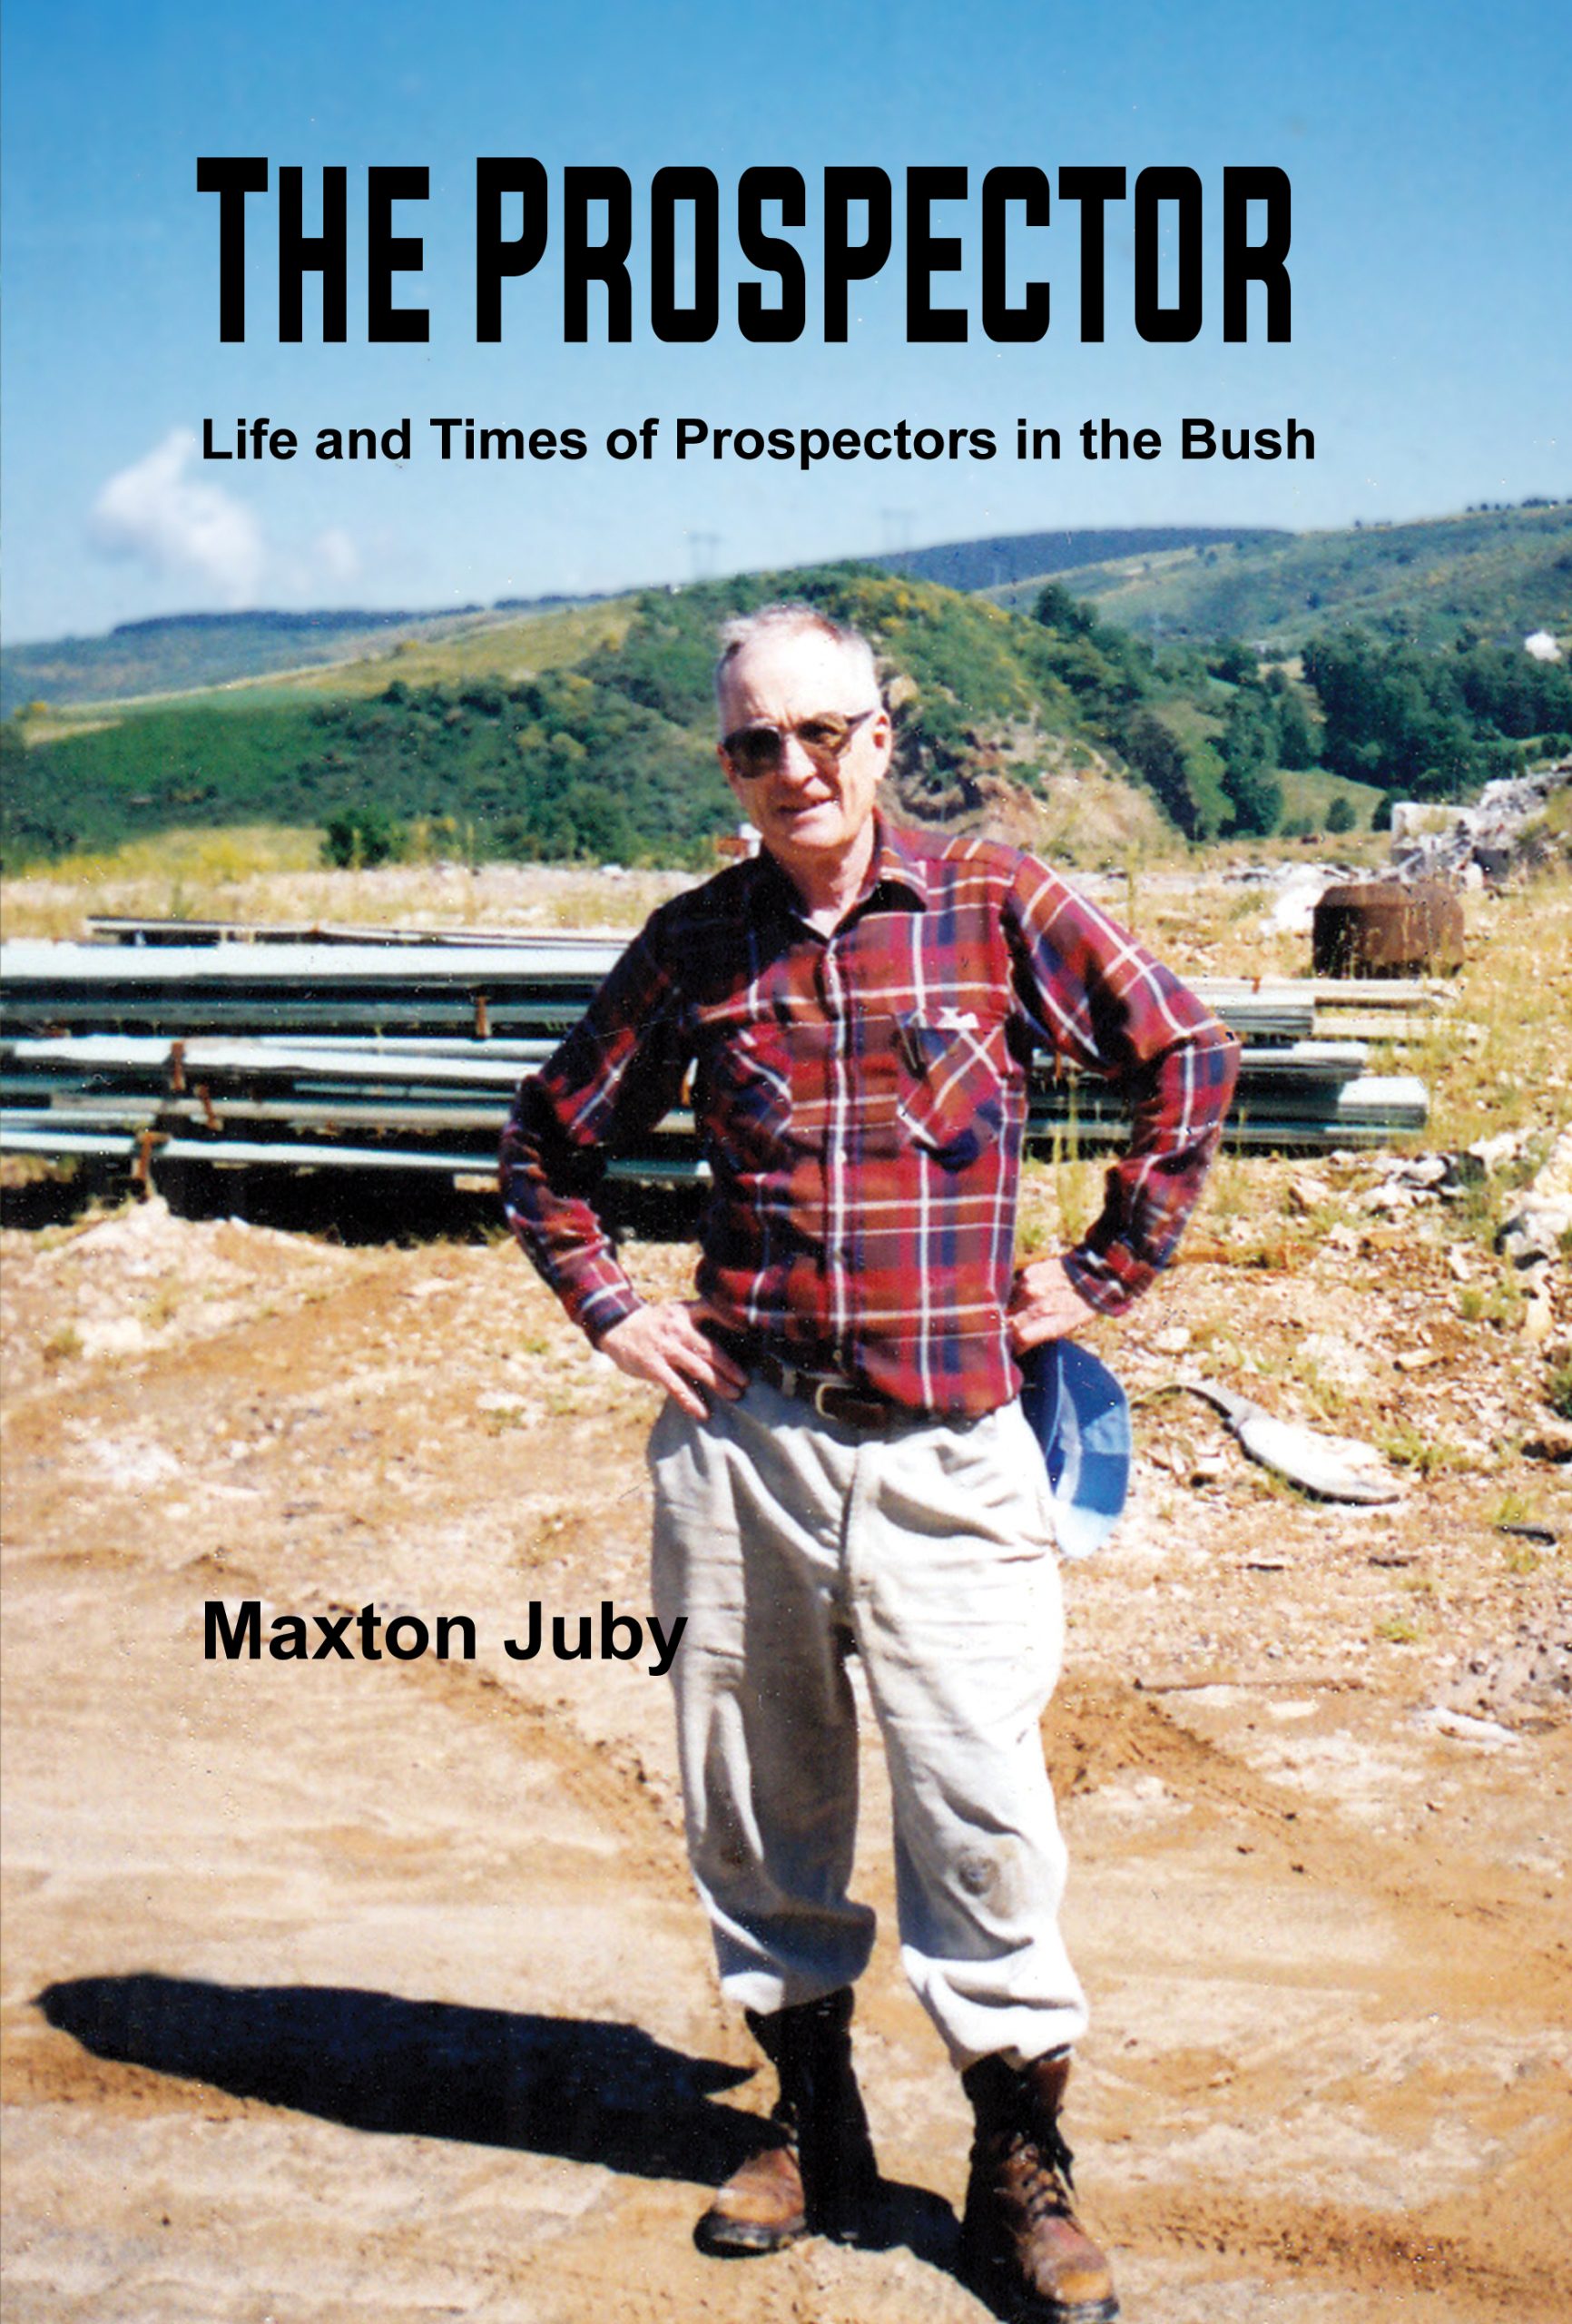 The Prospector - by Maxton Juby (front cover 2022)